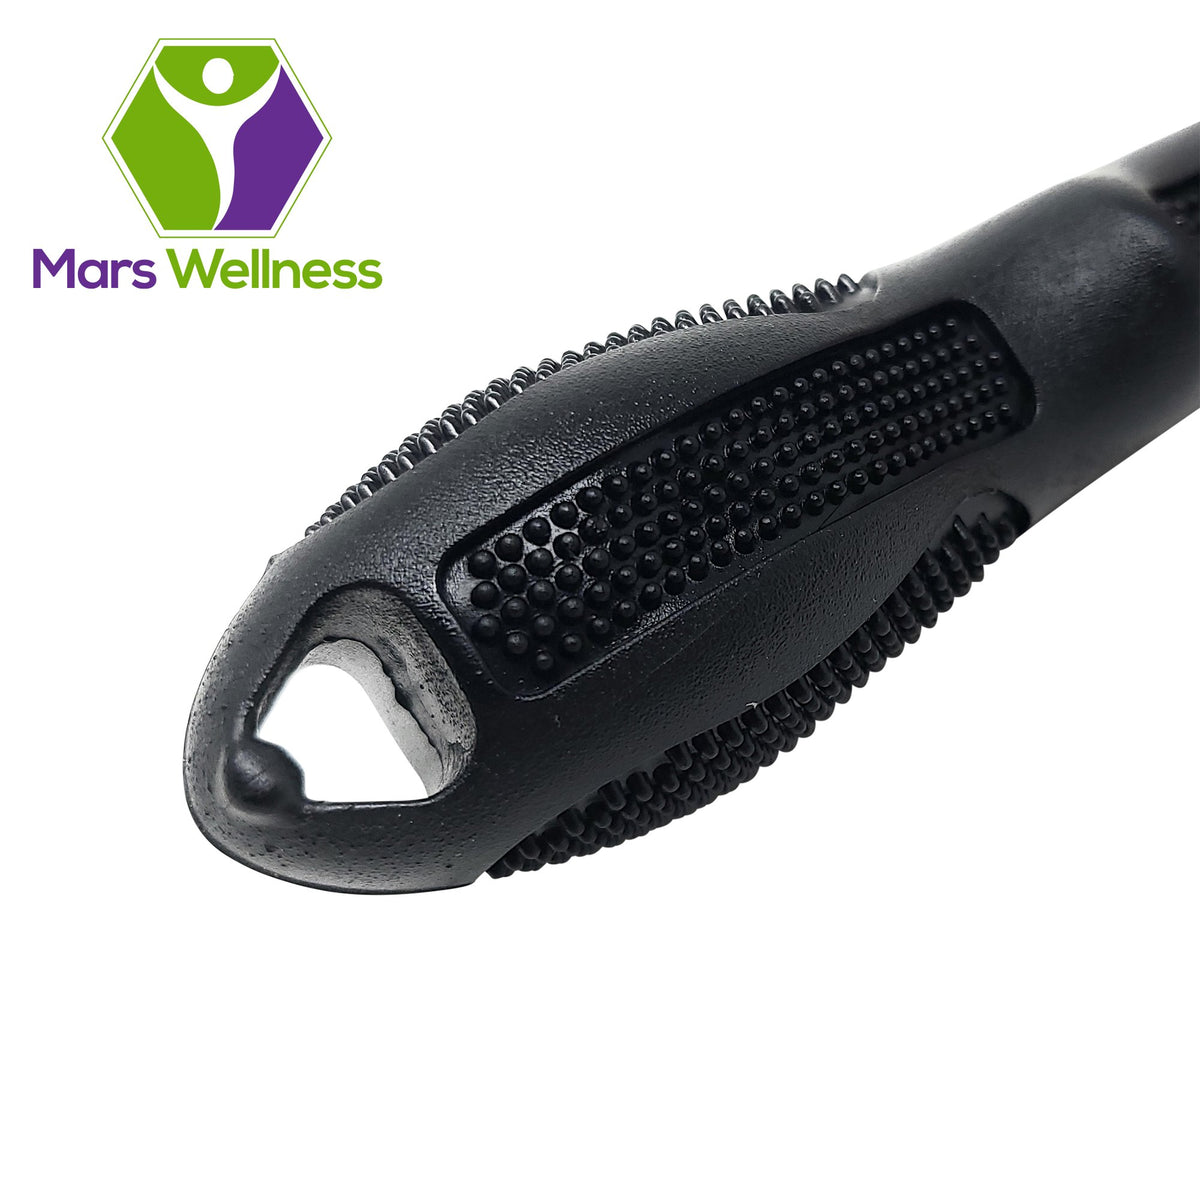 MARS WELLNESS Pet Grooming Brush - Double Sided Shedding and Dematting Tool - Grooming Undercoat Rake for Cats and Dogs - Mars Med Supply